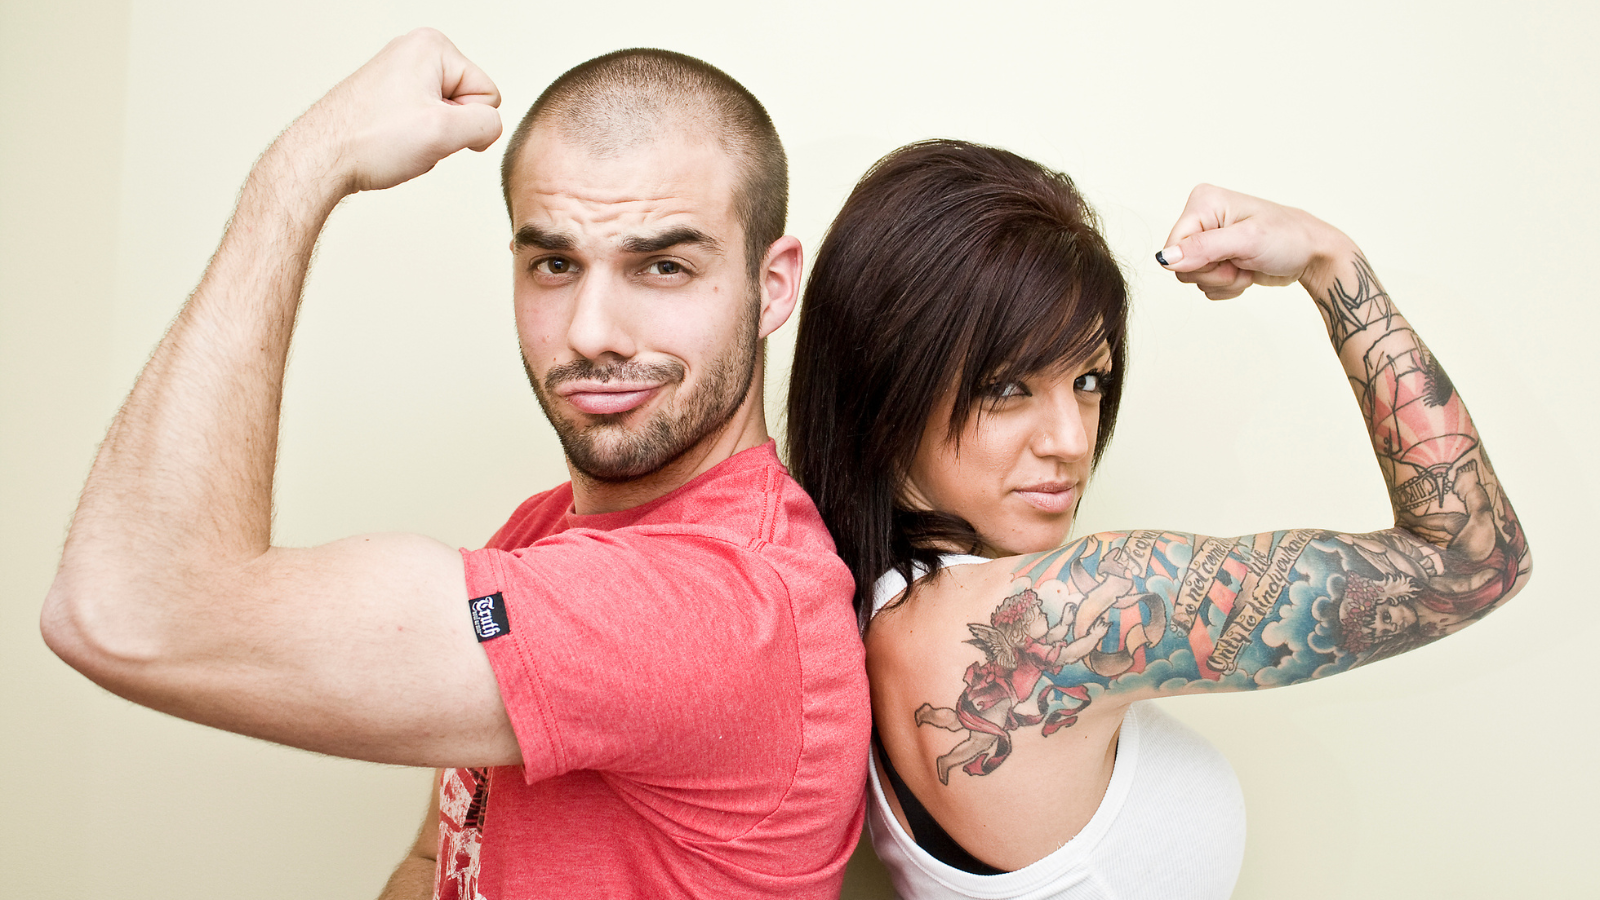 Couple showing off muscles lady with tattoos